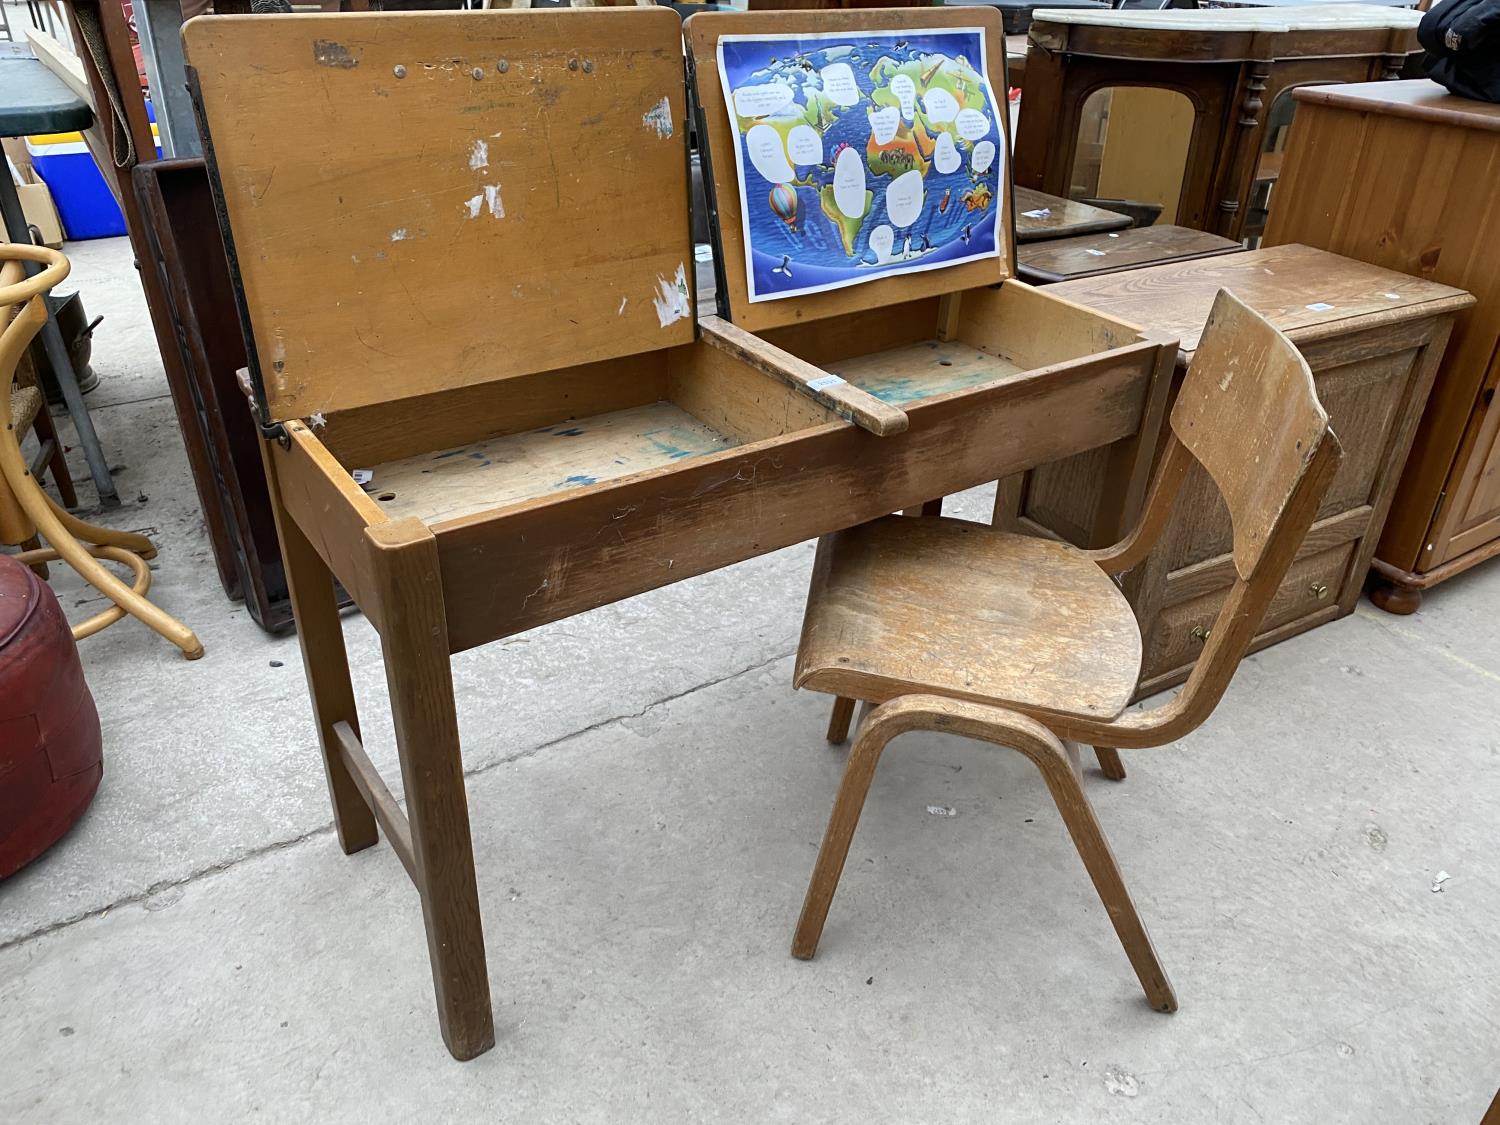 A MID 20TH CENTURY CHILDS DOUBLE DESK WITH BENTWOOD CHAIR - Image 3 of 3